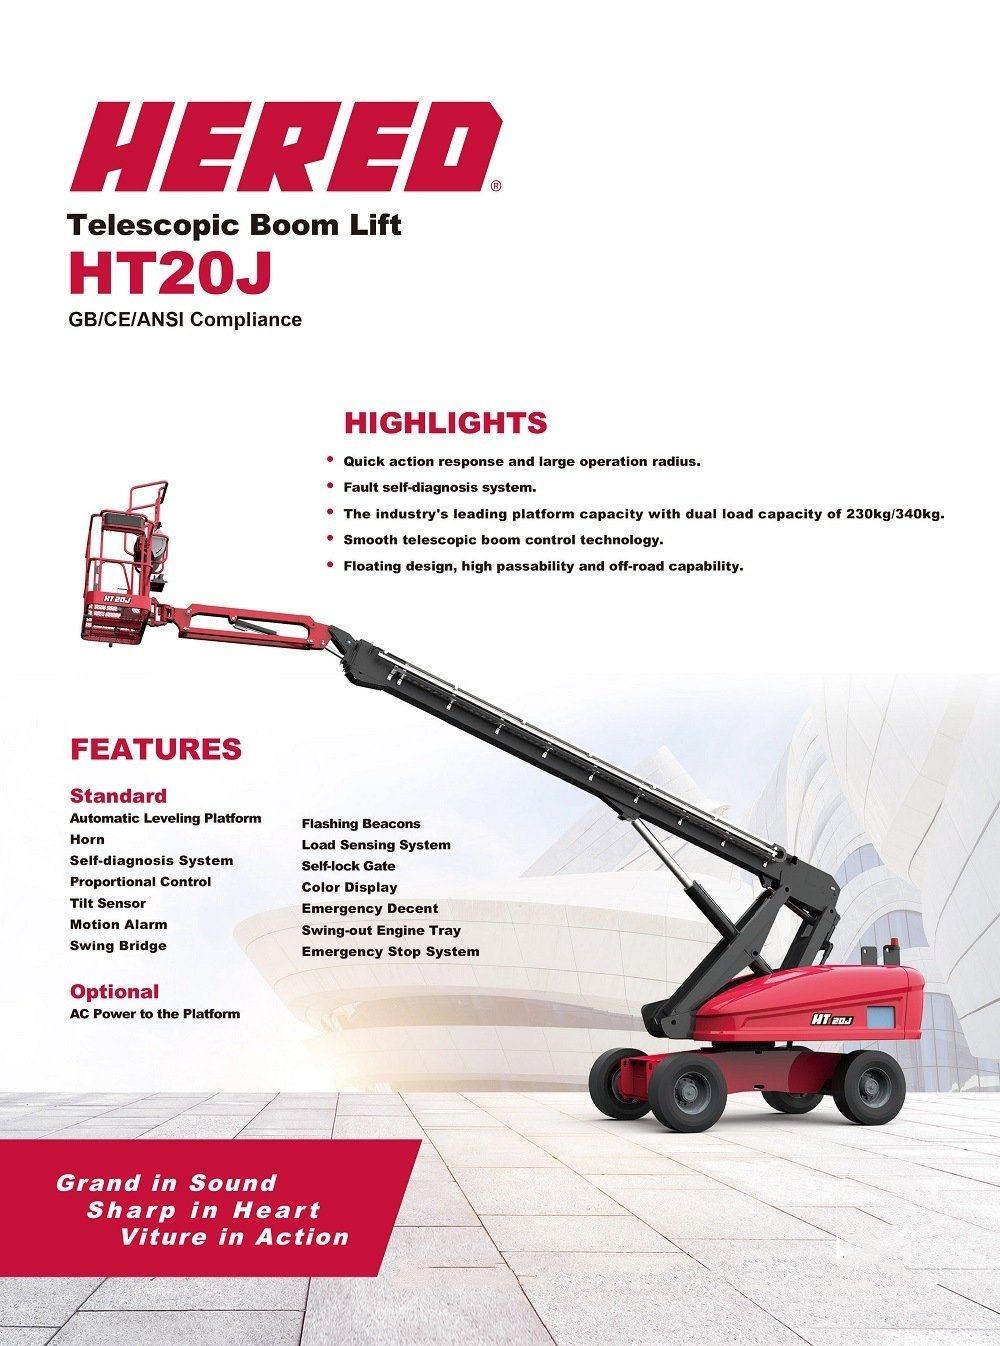 Self-Propelled Boom Lift Telescopic Electric Aerial Work Platform Articulated Towable Cherry Picker